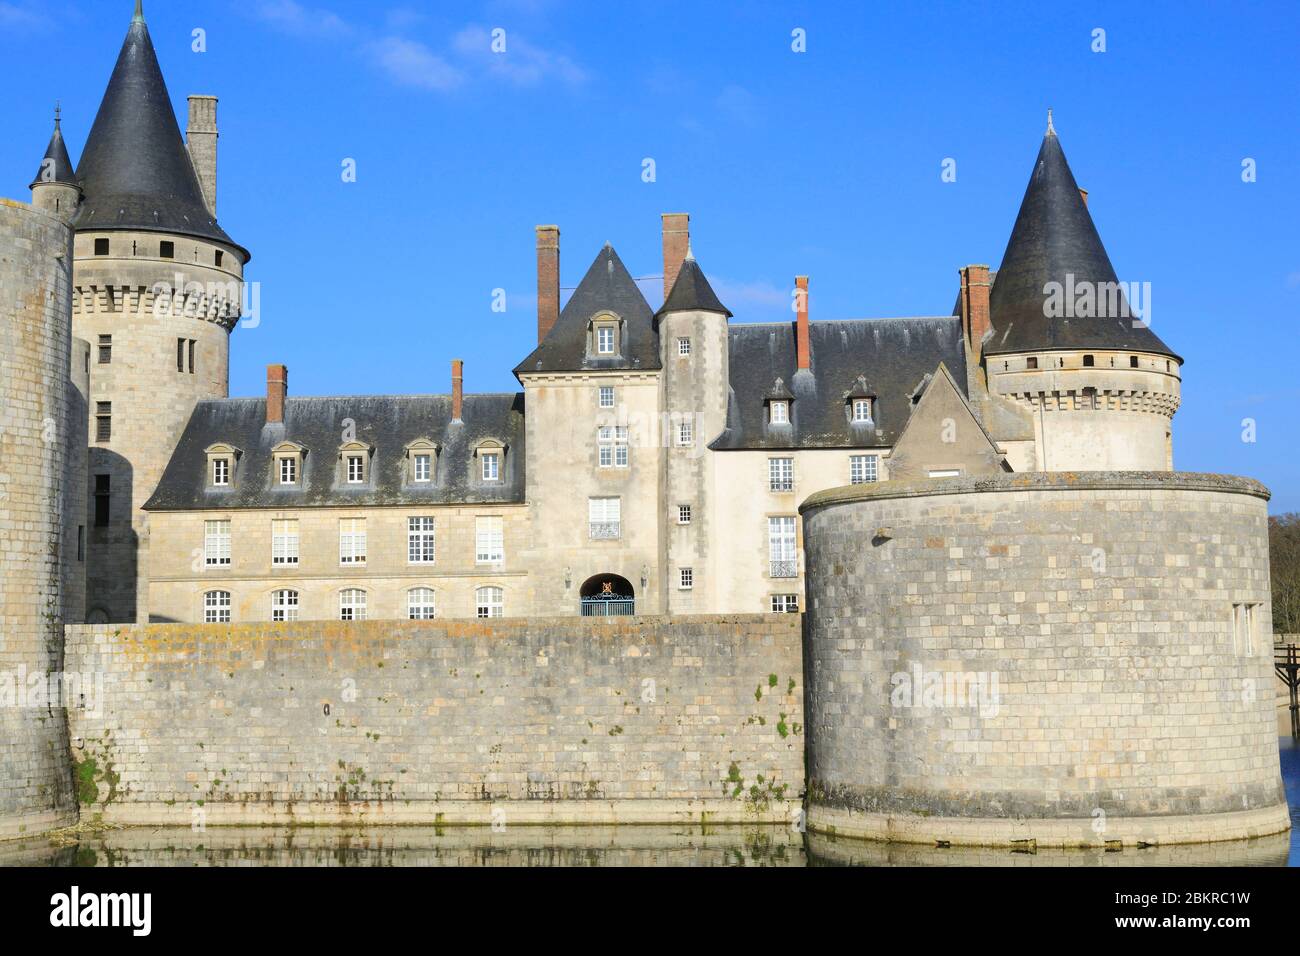 France, Loiret, Sully sur Loire (commune is located within the perimeter of the Loire Valley listed as World Heritage by UNESCO), castle (14th-18th century) of Renaissance style and its moats Stock Photo